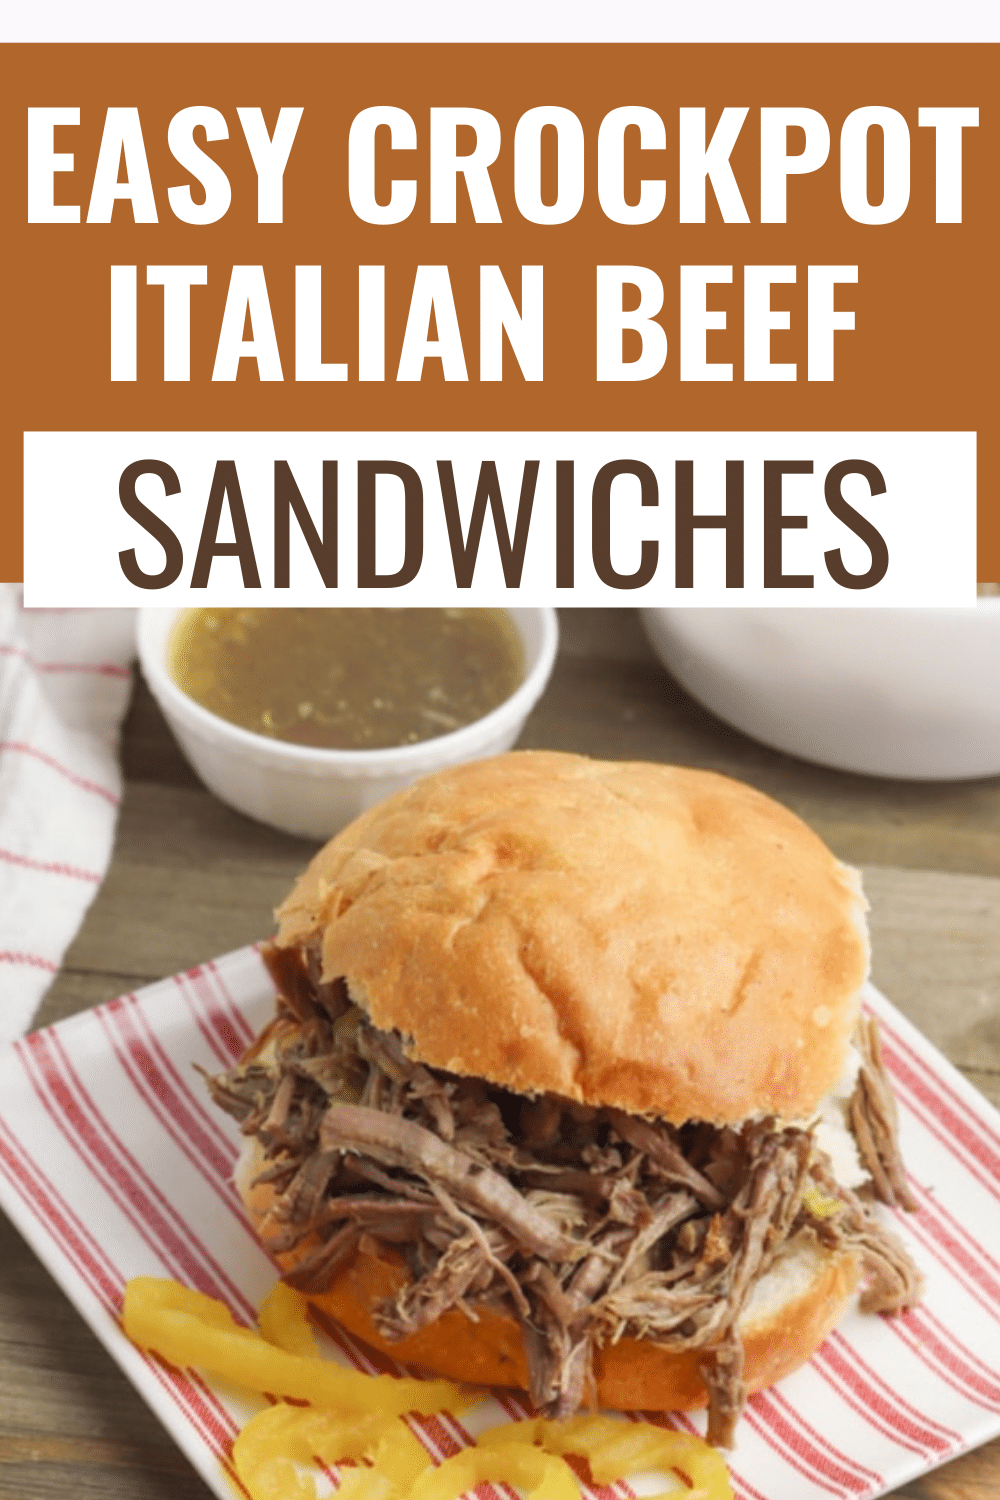 These Easy Crockpot Italian Beef Sandwiches are absolutely delicious and all you have to do is add the ingredients to the slow cooker. #crockpot #italianbeef #slowcooker via @wondermomwannab